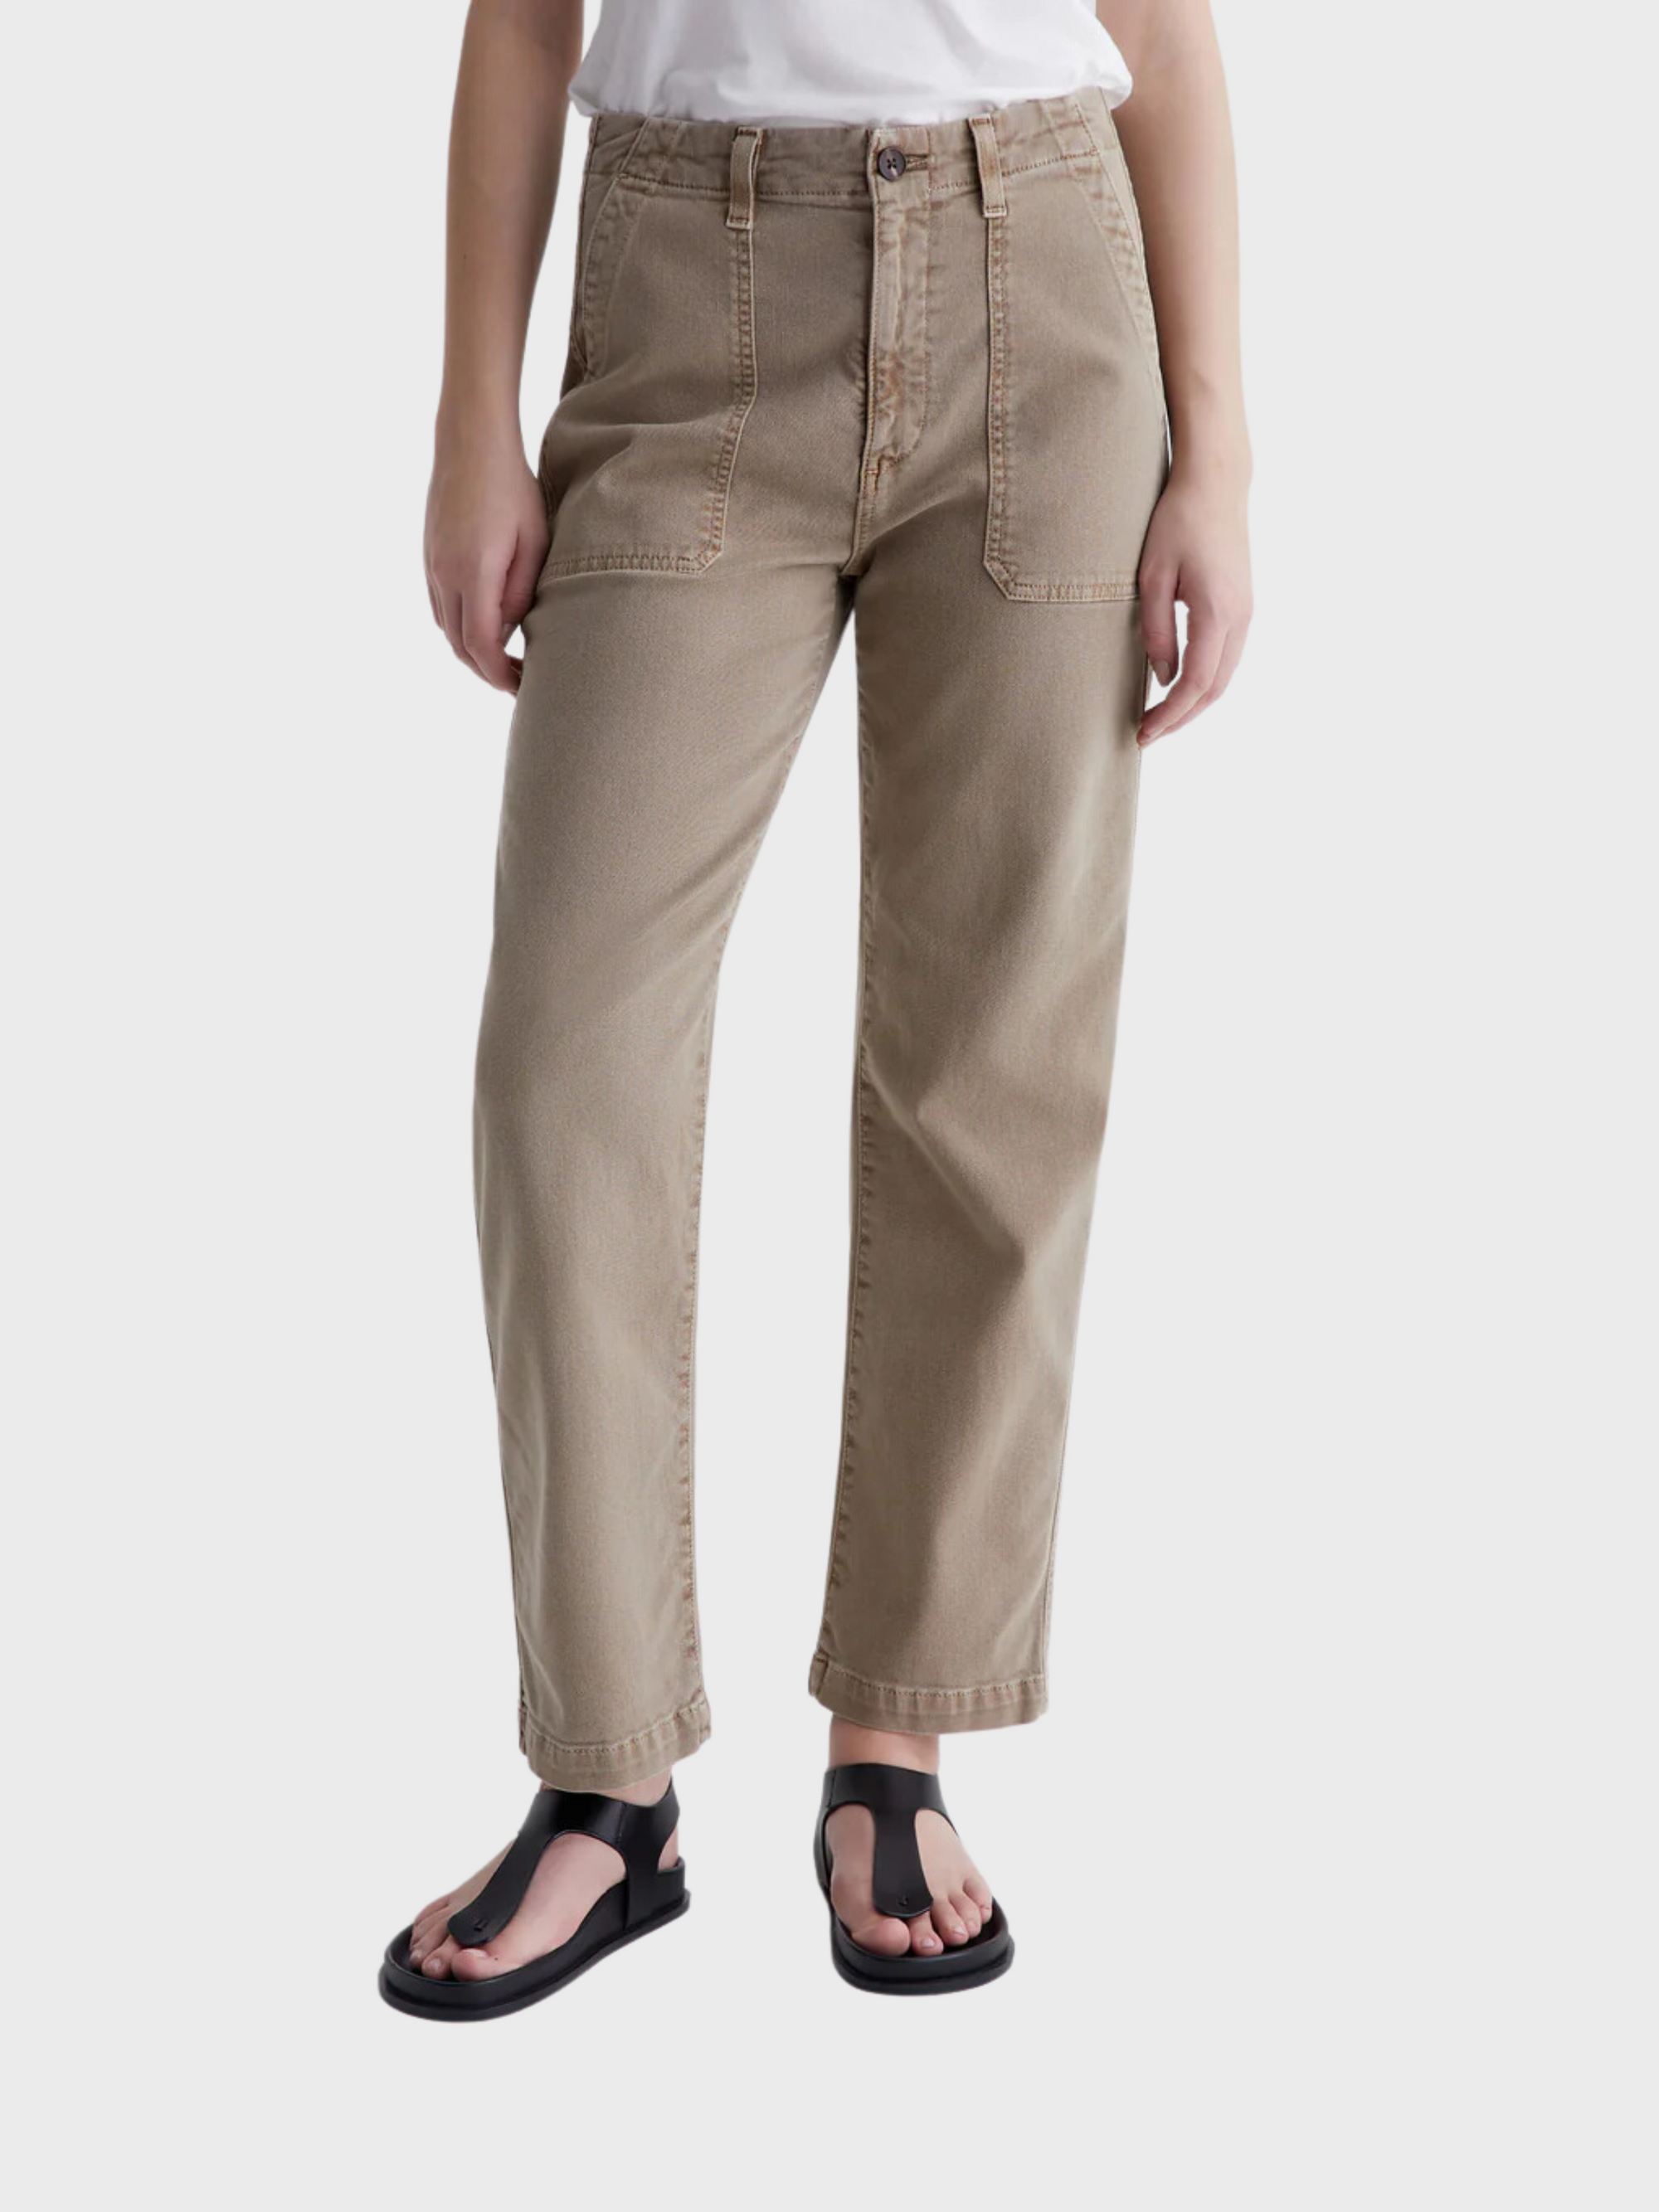 AG Analeigh Pant Sulfur Desert Taupe-Pants-West of Woodward Boutique-Vancouver-Canada